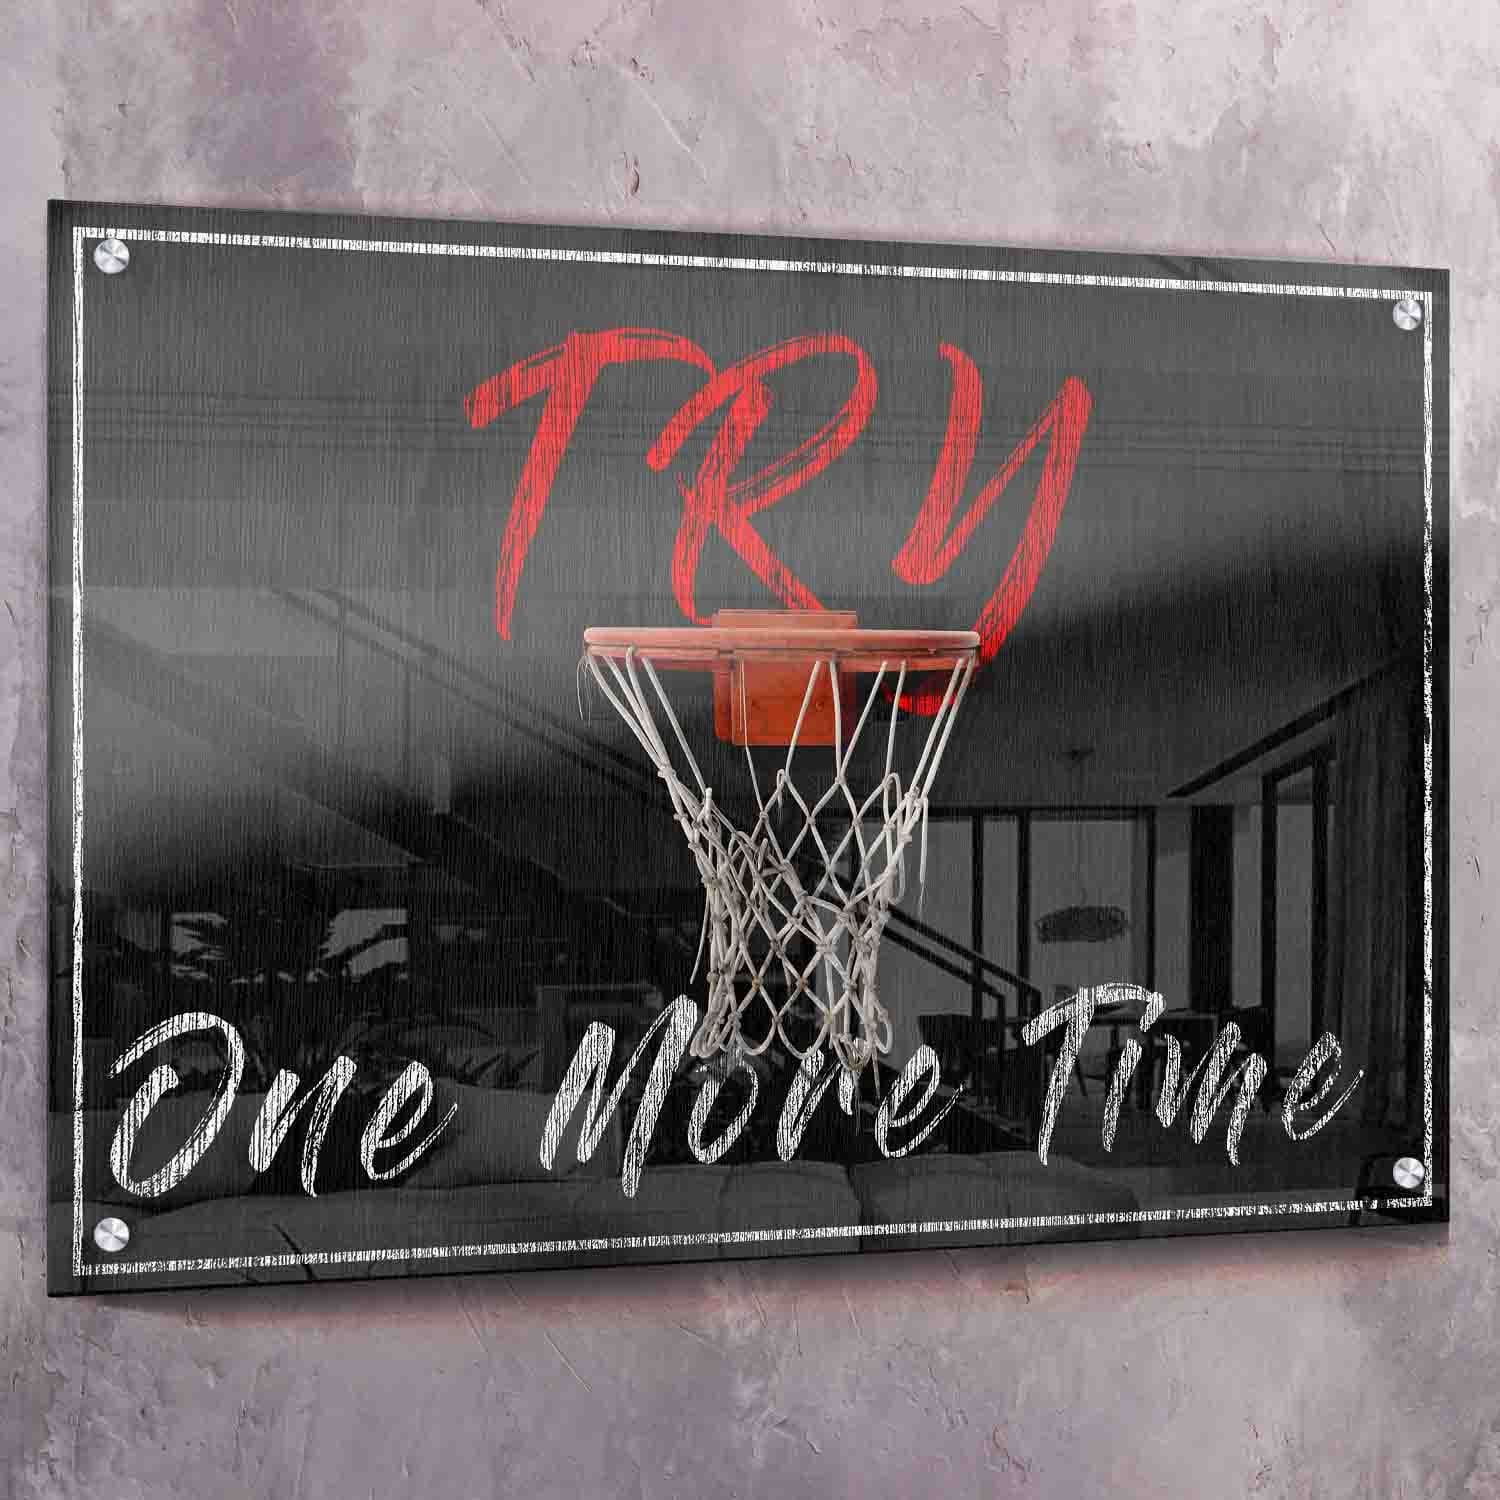 Try One More Time Wall Art | Inspirational Wall Art Motivational Wall Art Quotes Office Art | ImpaktMaker Exclusive Canvas Art Landscape